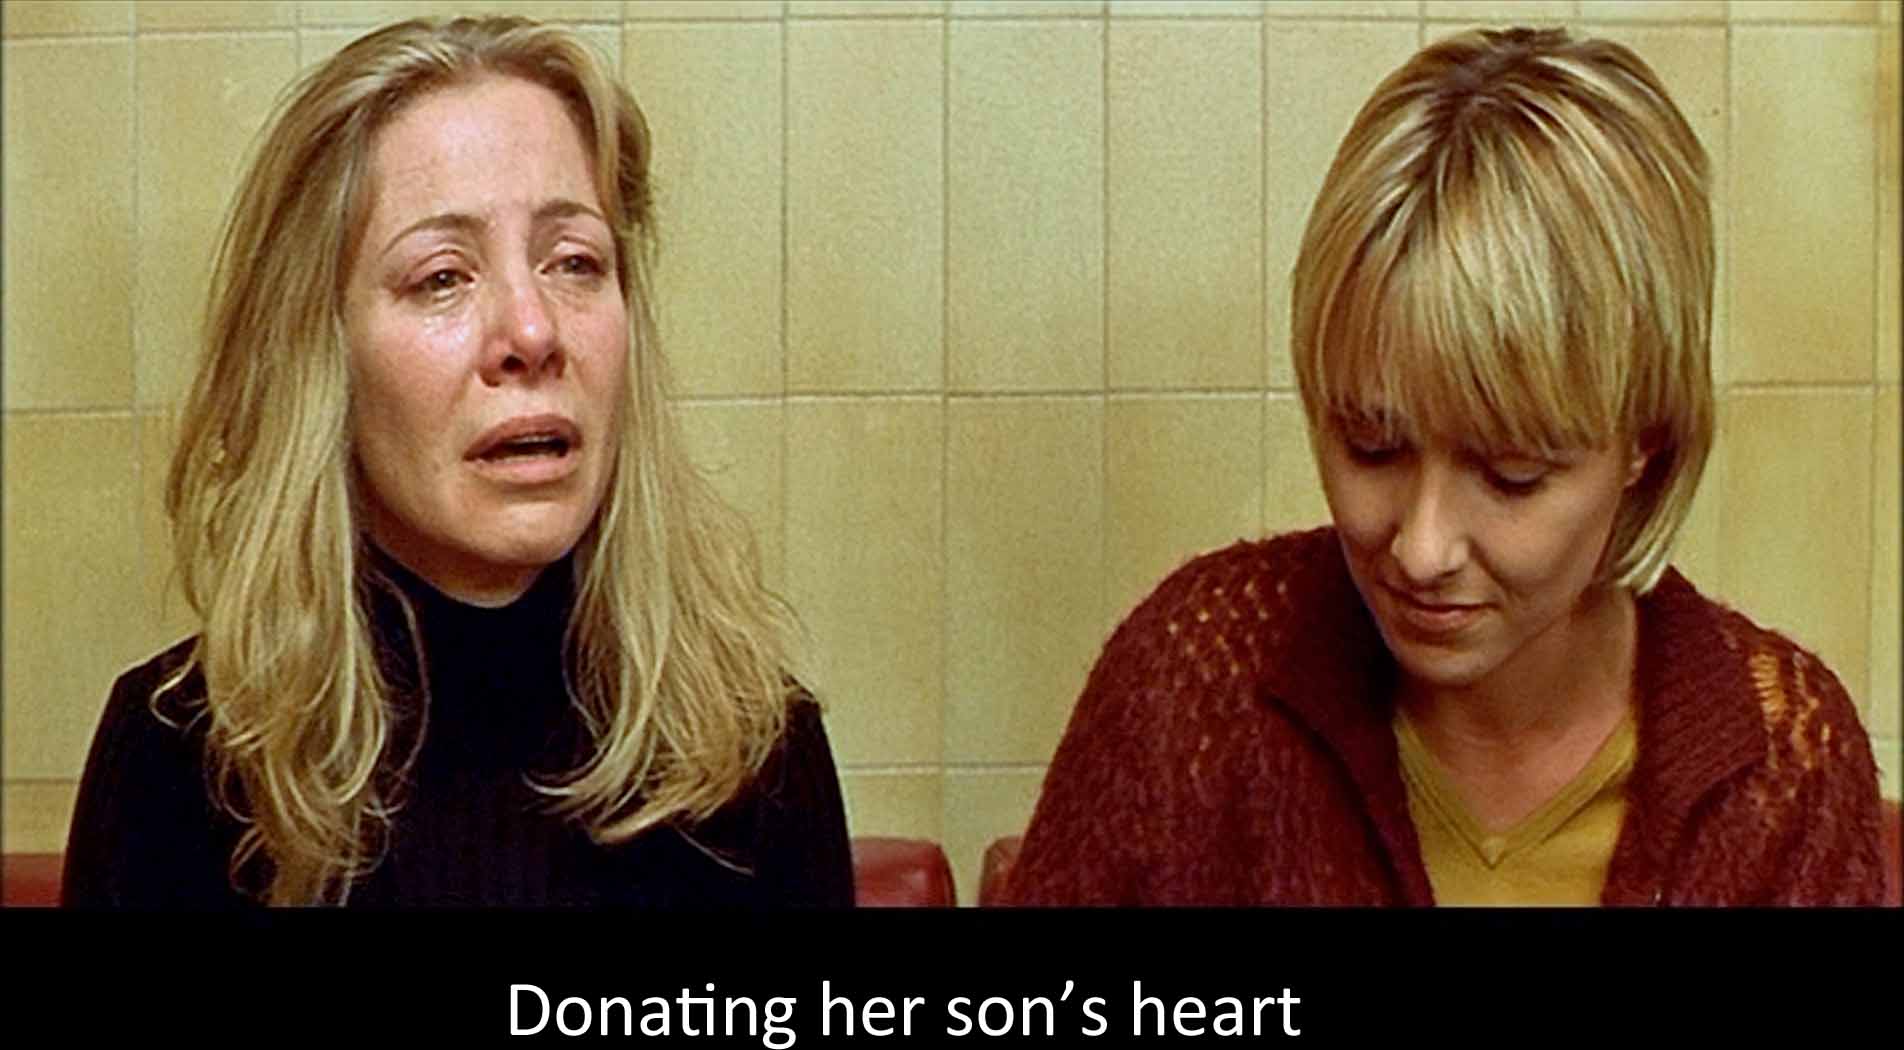 Donating her son's heart